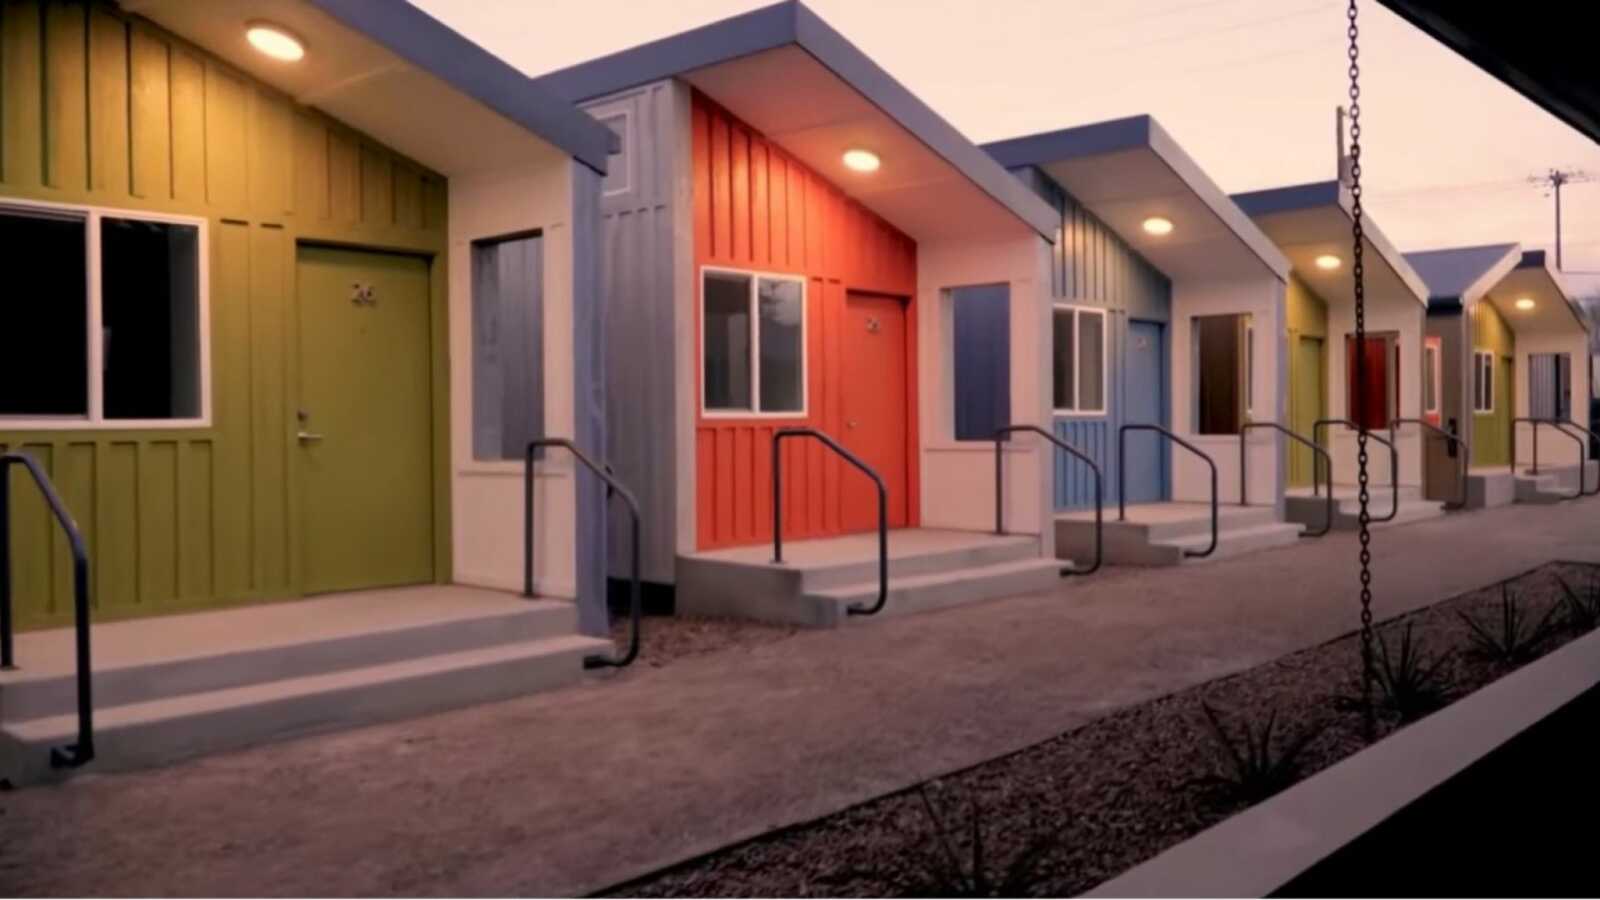 tiny homes for the homeless people in New Mexico